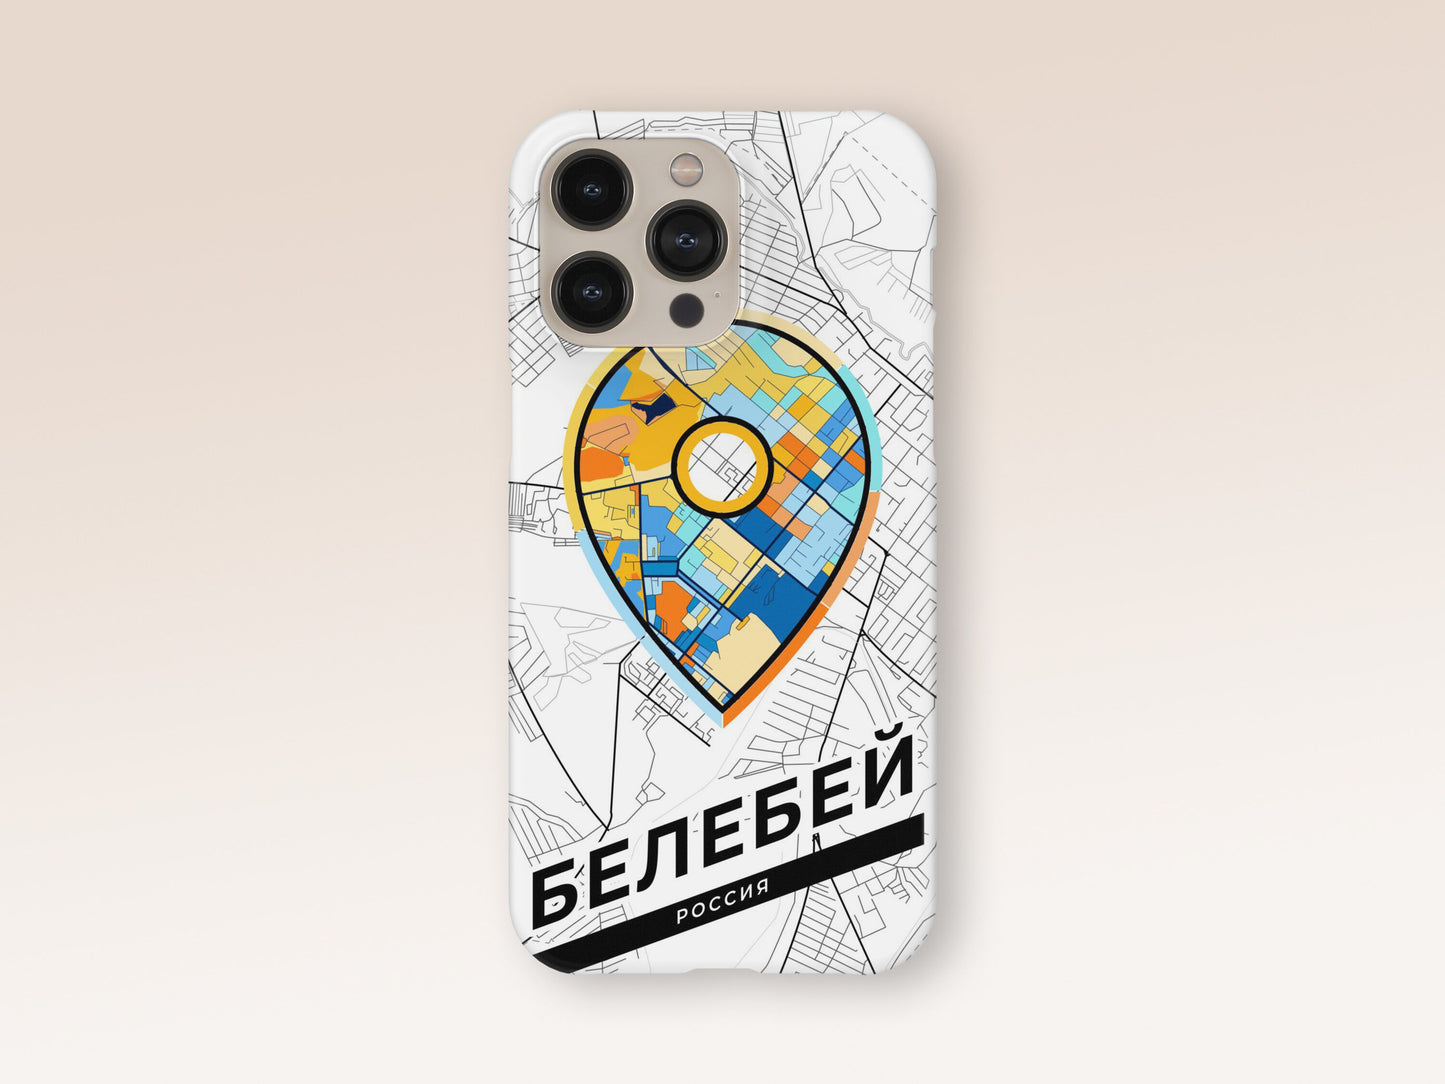 Belebey Russia slim phone case with colorful icon. Birthday, wedding or housewarming gift. Couple match cases. 1